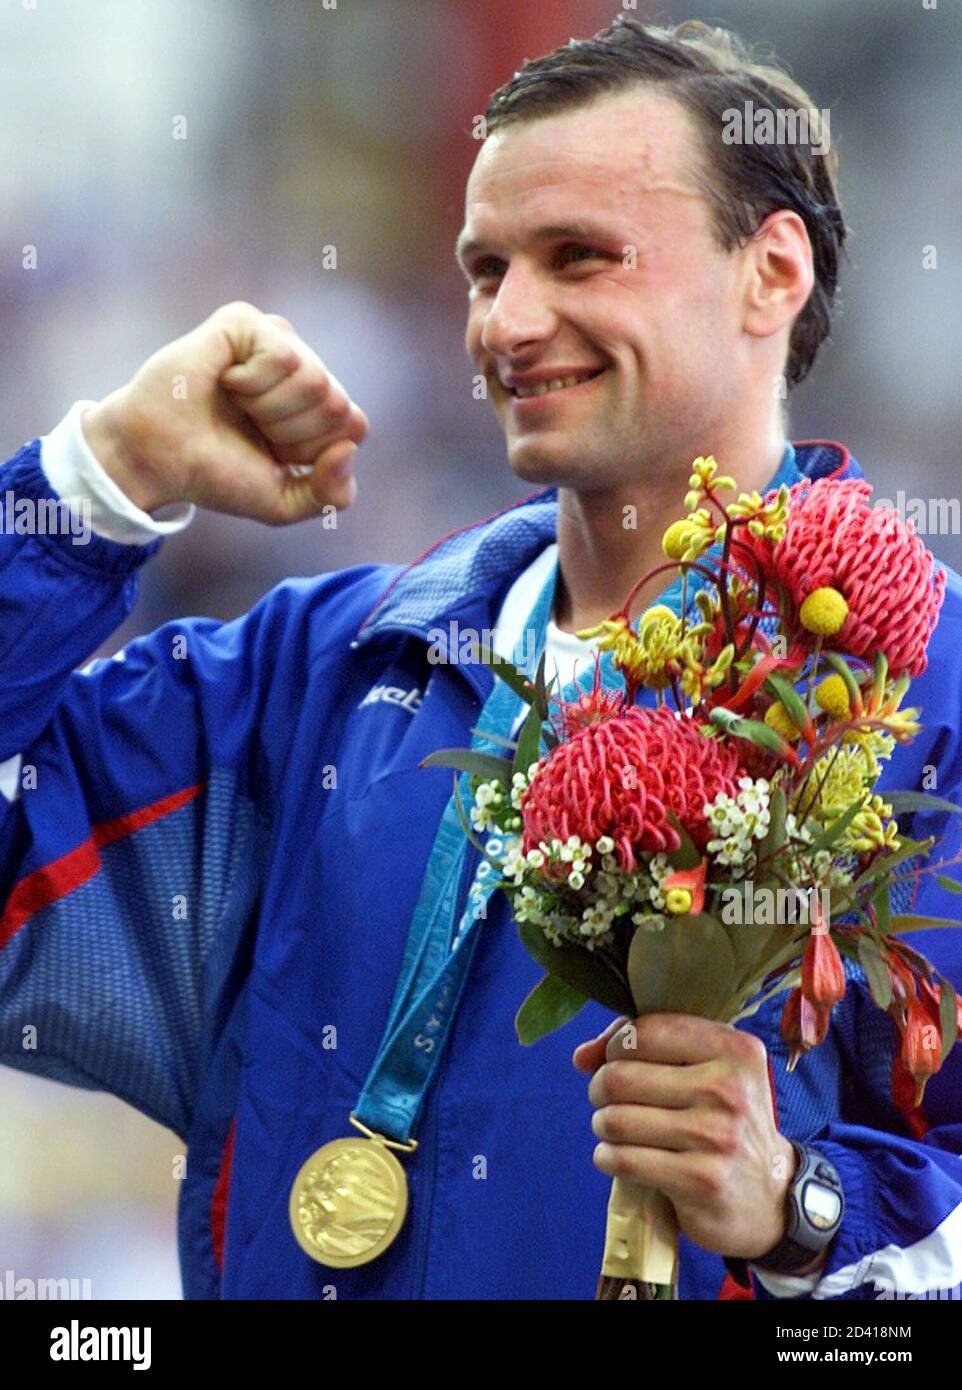 Dmitry Svatkovsky of Russia wears his gold medal for the men's modern pentathlon during the ceremony at the Sydney Olympics, September 30, 2000. [Gabor of Hungary won silver and Pavel